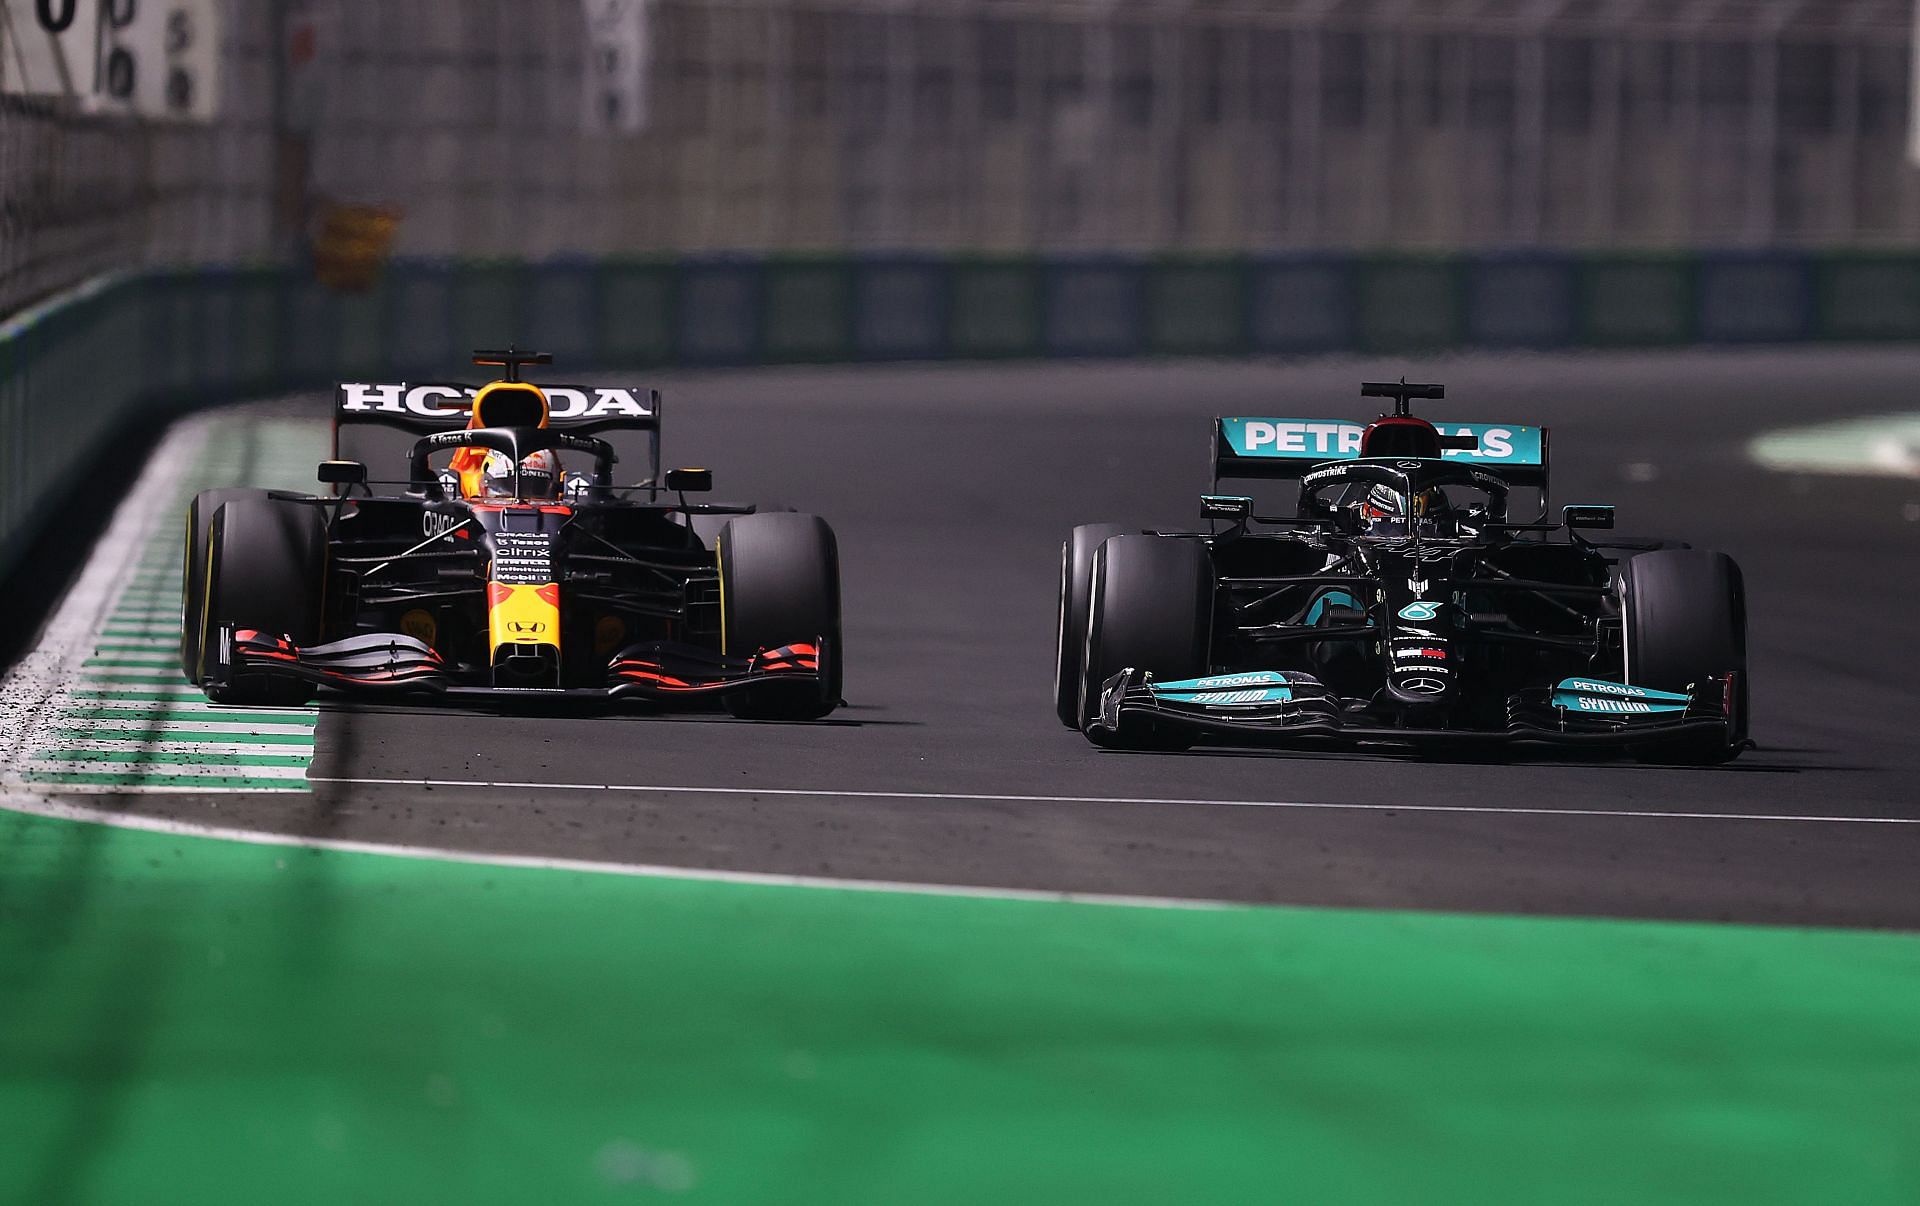 Max Verstappen (left) and Lewis Hamilton (right) joust on the streets of Jeddah during the 2021 F1 Saudi Arabian GP (Photo by Lars Baron/Getty Images)